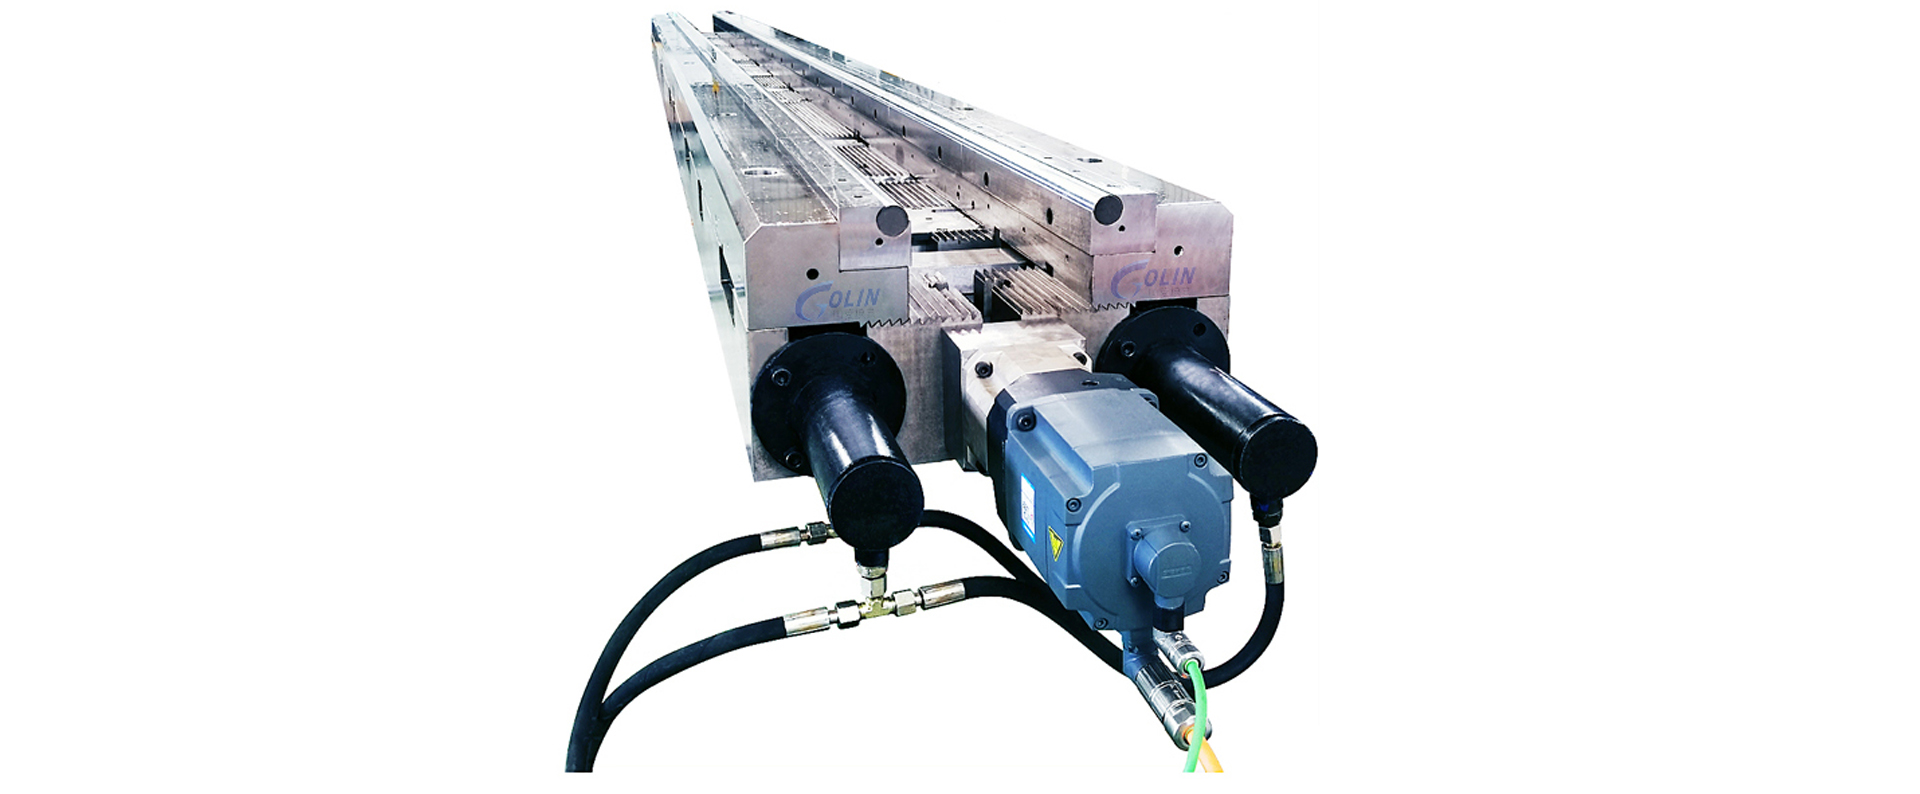 Leading designers and manufacturers of Press Brake Tools